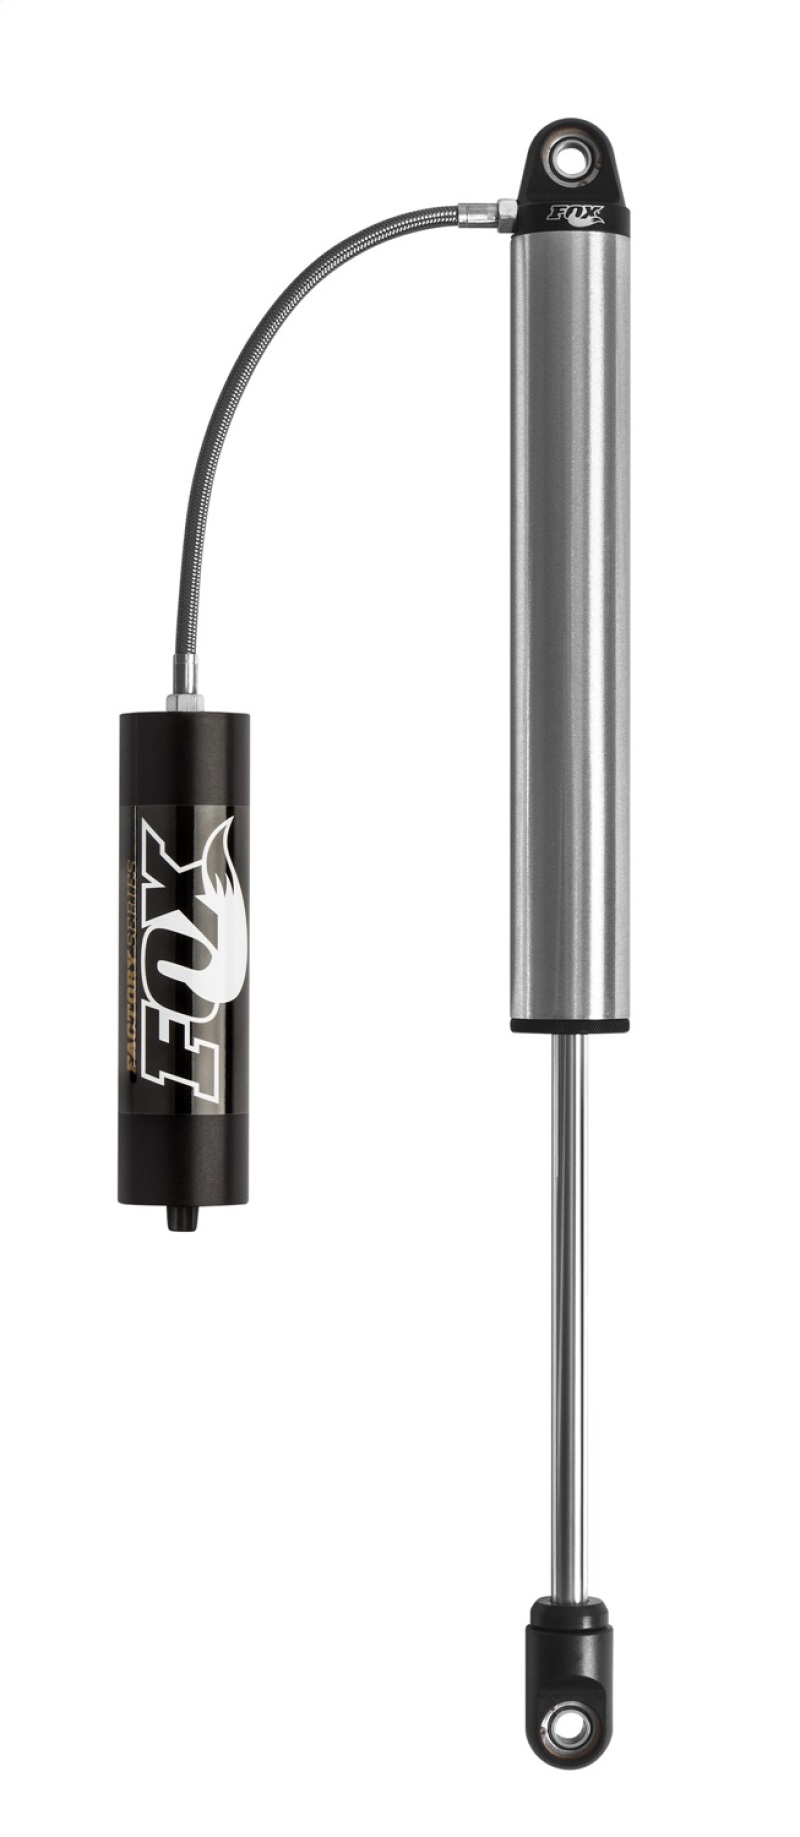 Fox 2.0 Factory Series 14in. Smooth Body Remote Reservoir Shock 5/8in. Shaft (30/90) - Blk - 980-02-035